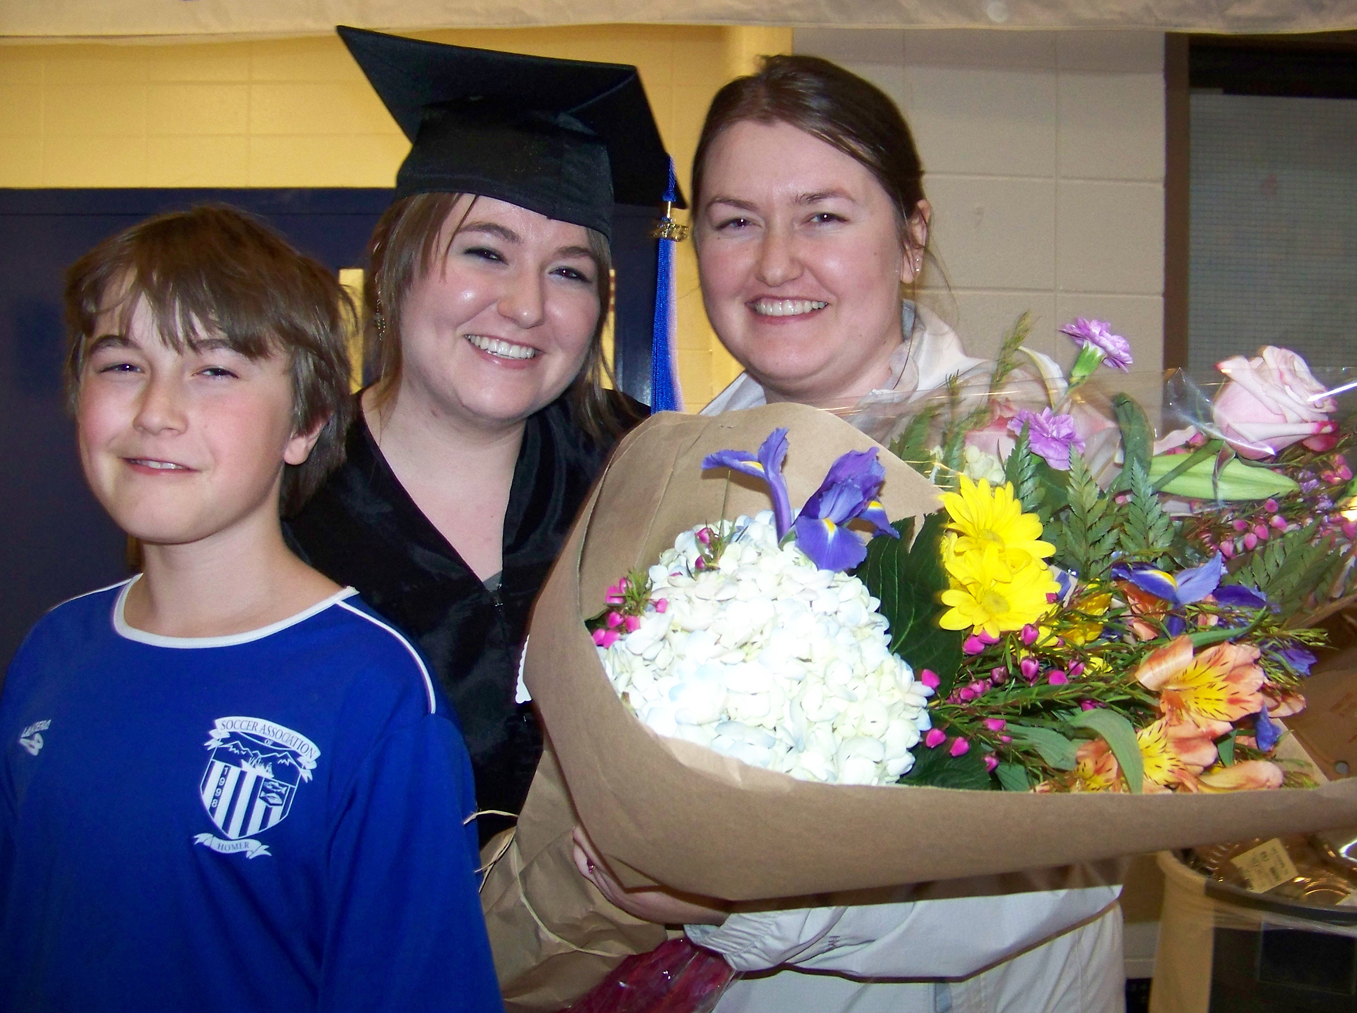 Surrounded by her brother Daniel, left, and sister Elikonida, right, valedictorian and student speaker Nina Reutov celebrates receiving her associate of arts degree at Kachemak Bay Campus’ May 8 commencement ceremony. -Photos by McKibben Jackinsky, Homer News